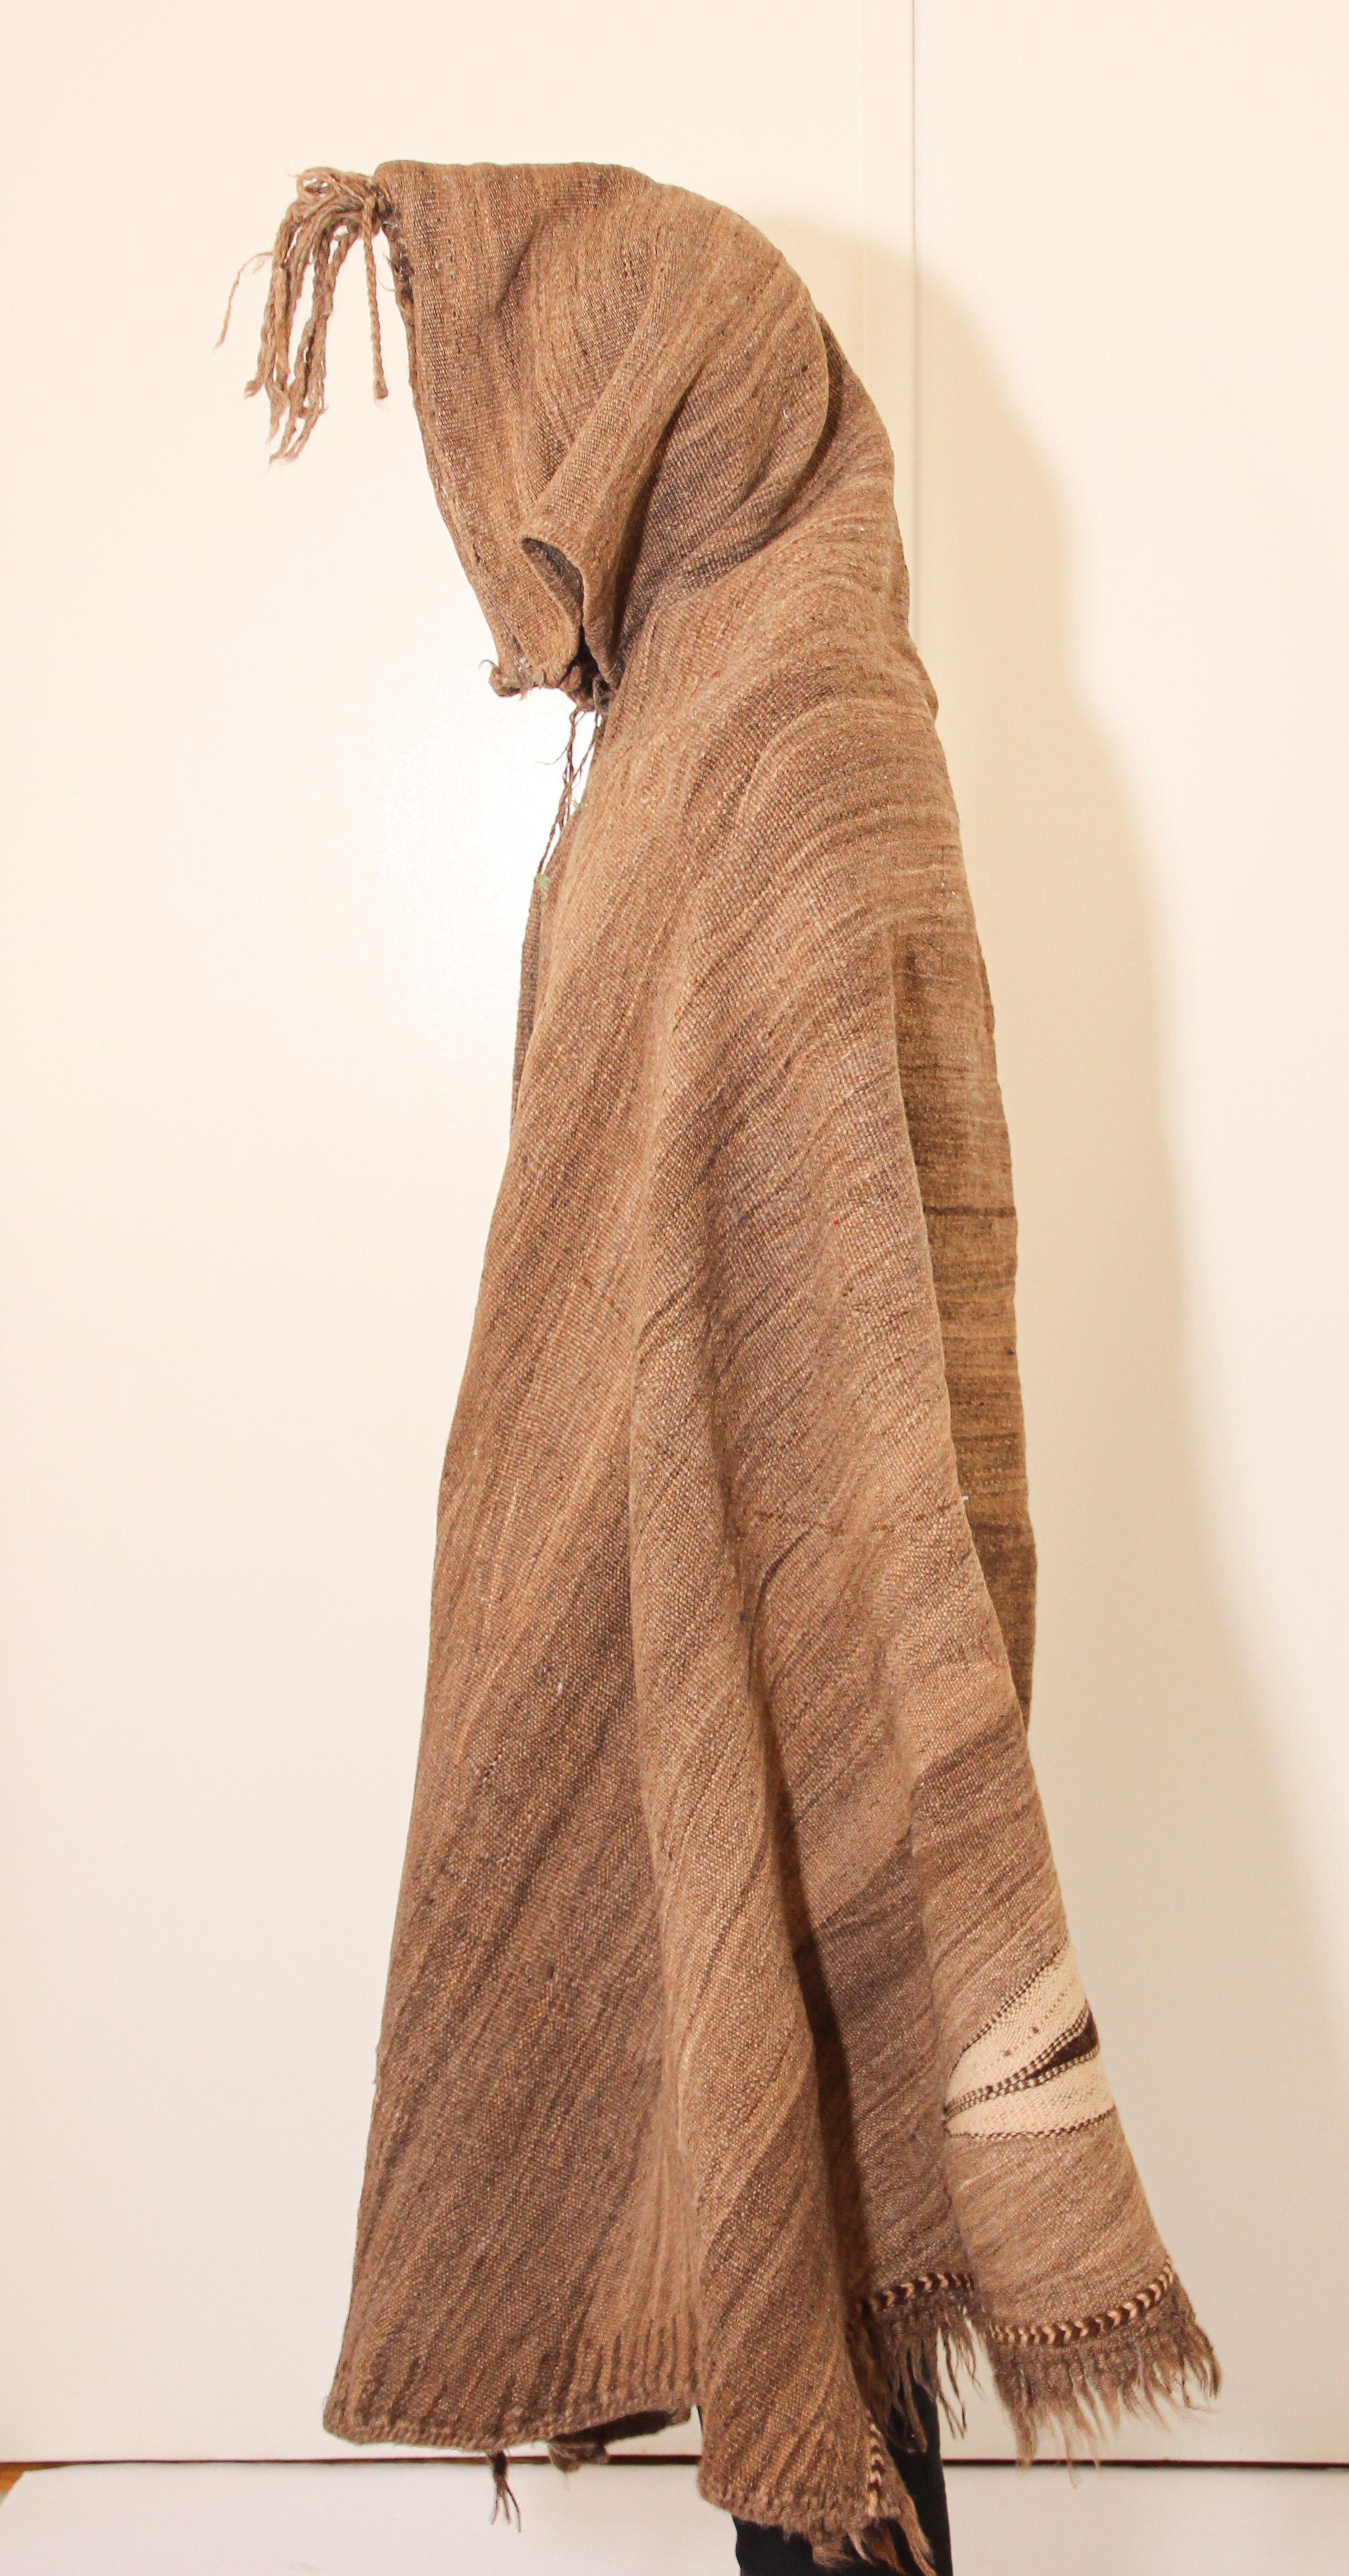 Berber Tribal North Africa Moroccan Burnous Wool Cape For Sale 1